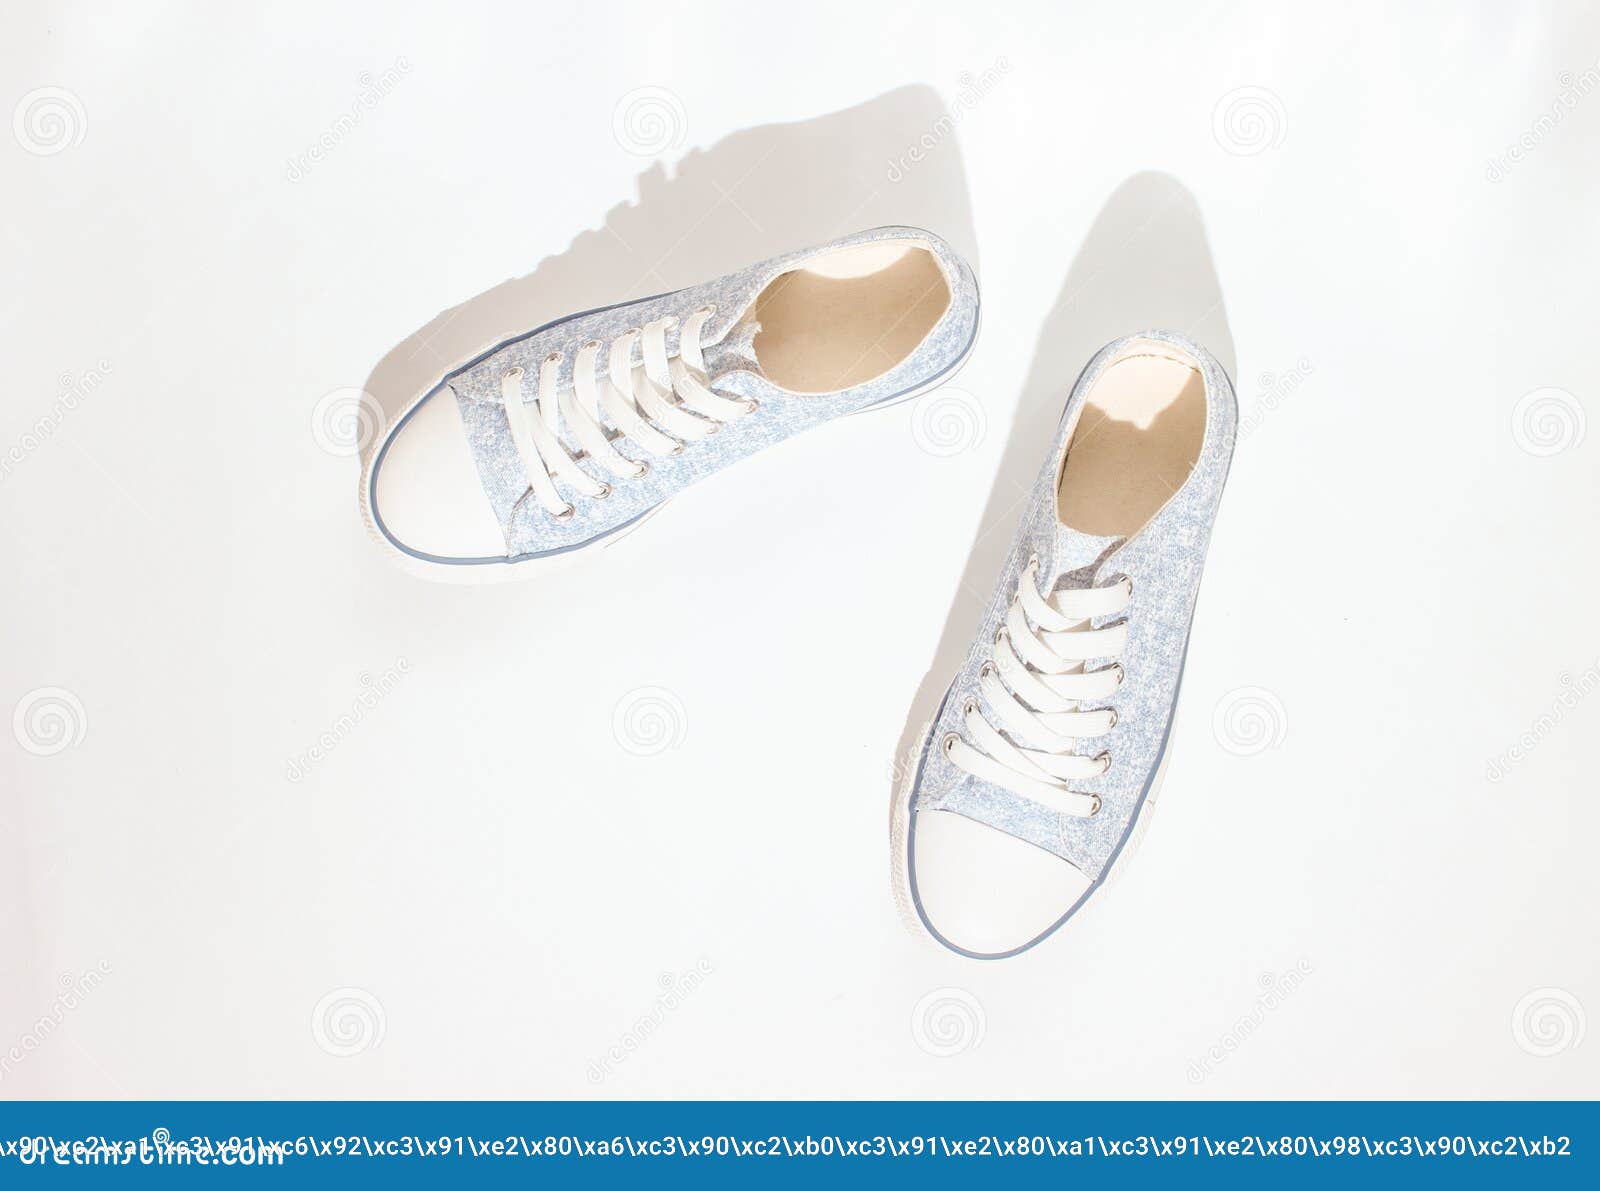 Fashion Sneakers on a White Background.Photo with Shadows, Hard Light ...